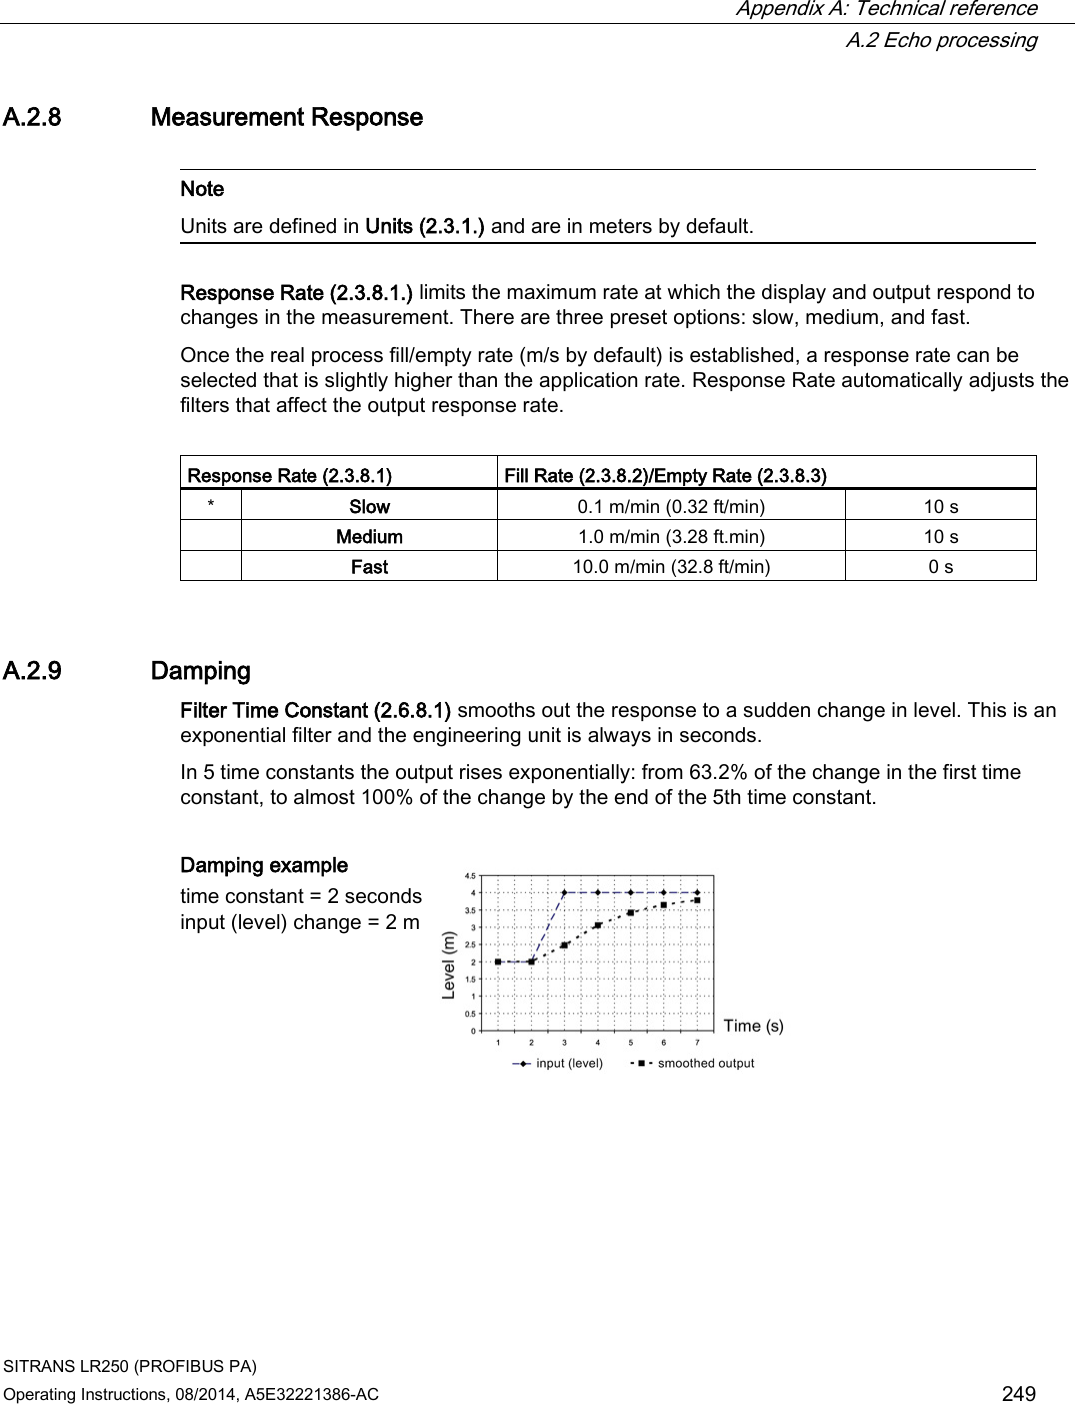  Appendix A: Technical reference  A.2 Echo processing SITRANS LR250 (PROFIBUS PA) Operating Instructions, 08/2014, A5E32221386-AC 249 A.2.8 Measurement Response   Note Units are defined in Units (2.3.1.) and are in meters by default.  Response Rate (2.3.8.1.) limits the maximum rate at which the display and output respond to changes in the measurement. There are three preset options: slow, medium, and fast.  Once the real process fill/empty rate (m/s by default) is established, a response rate can be selected that is slightly higher than the application rate. Response Rate automatically adjusts the filters that affect the output response rate.  Response Rate (2.3.8.1) Fill Rate (2.3.8.2)/Empty Rate (2.3.8.3) * Slow 0.1 m/min (0.32 ft/min) 10 s  Medium 1.0 m/min (3.28 ft.min) 10 s  Fast 10.0 m/min (32.8 ft/min) 0 s A.2.9 Damping Filter Time Constant (2.6.8.1) smooths out the response to a sudden change in level. This is an exponential filter and the engineering unit is always in seconds.  In 5 time constants the output rises exponentially: from 63.2% of the change in the first time constant, to almost 100% of the change by the end of the 5th time constant.  Damping example time constant = 2 seconds input (level) change = 2 m   